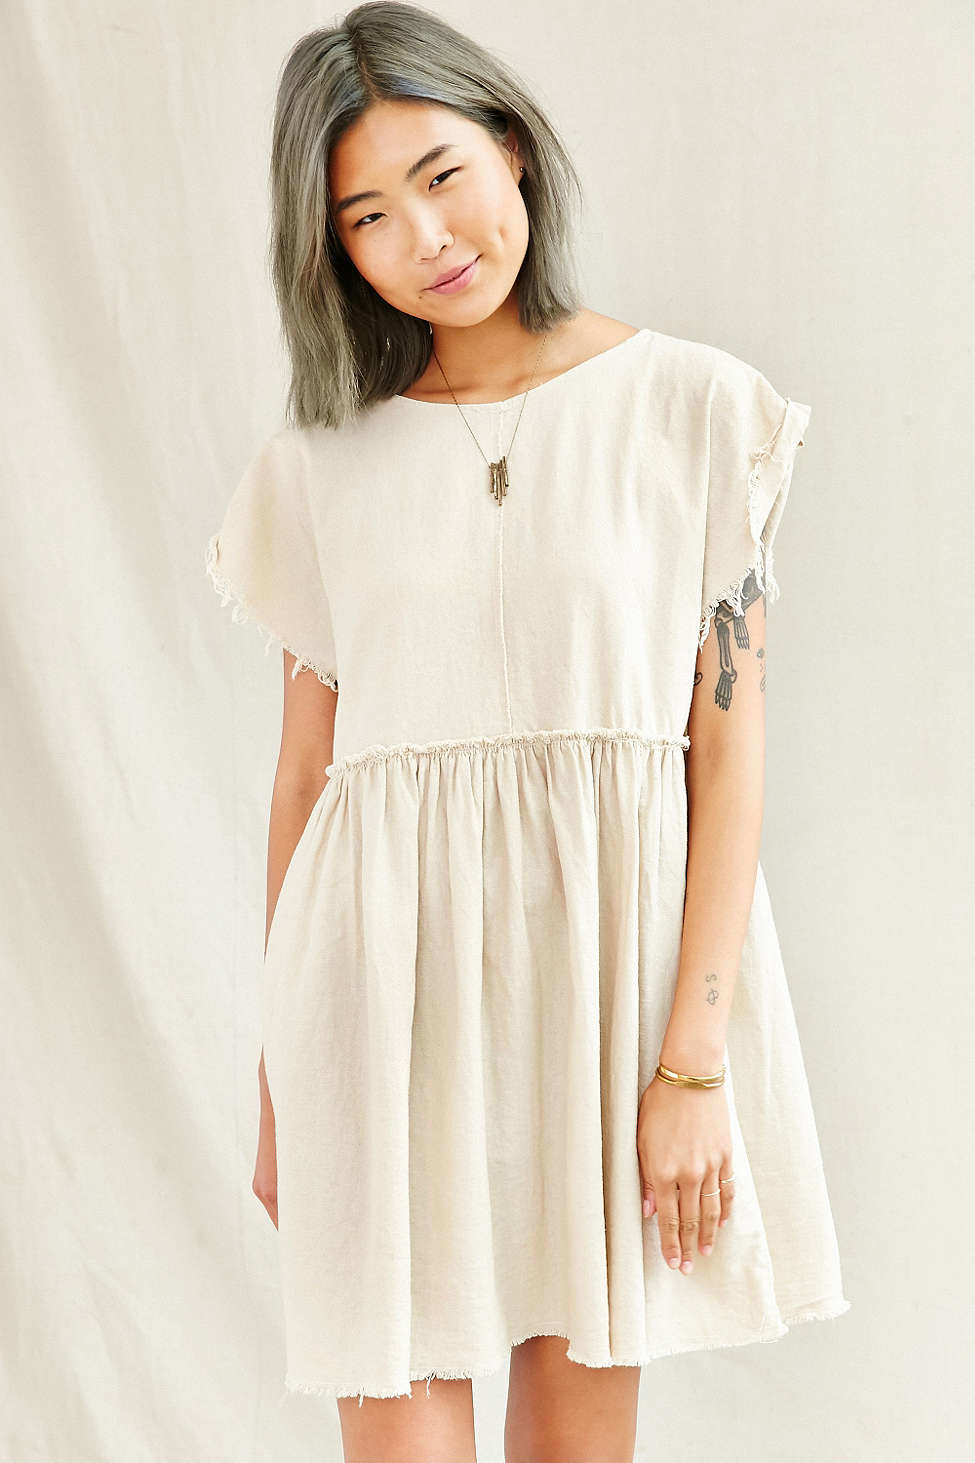 Lyst - Urban Renewal Remade Raw Edge Linen Babydoll Dress in Natural